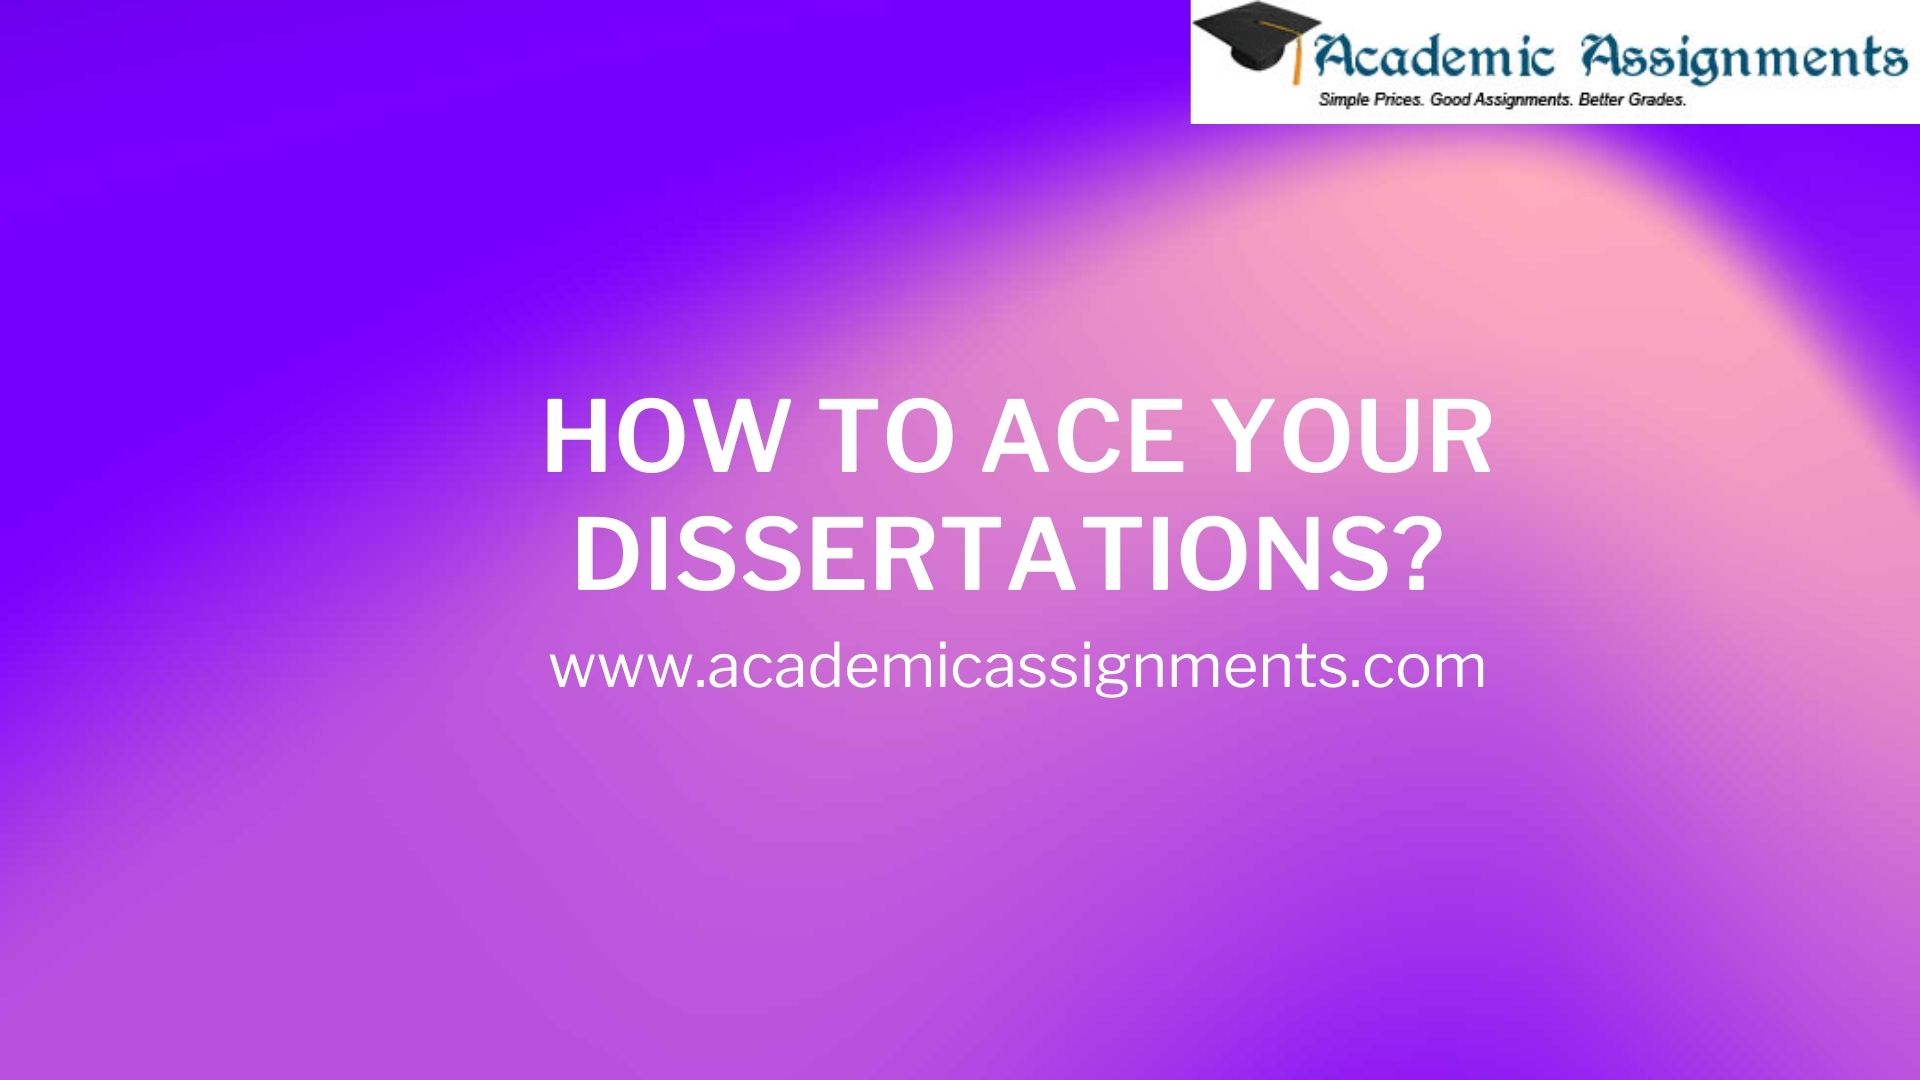 HOW TO ACE YOUR DISSERTATIONS